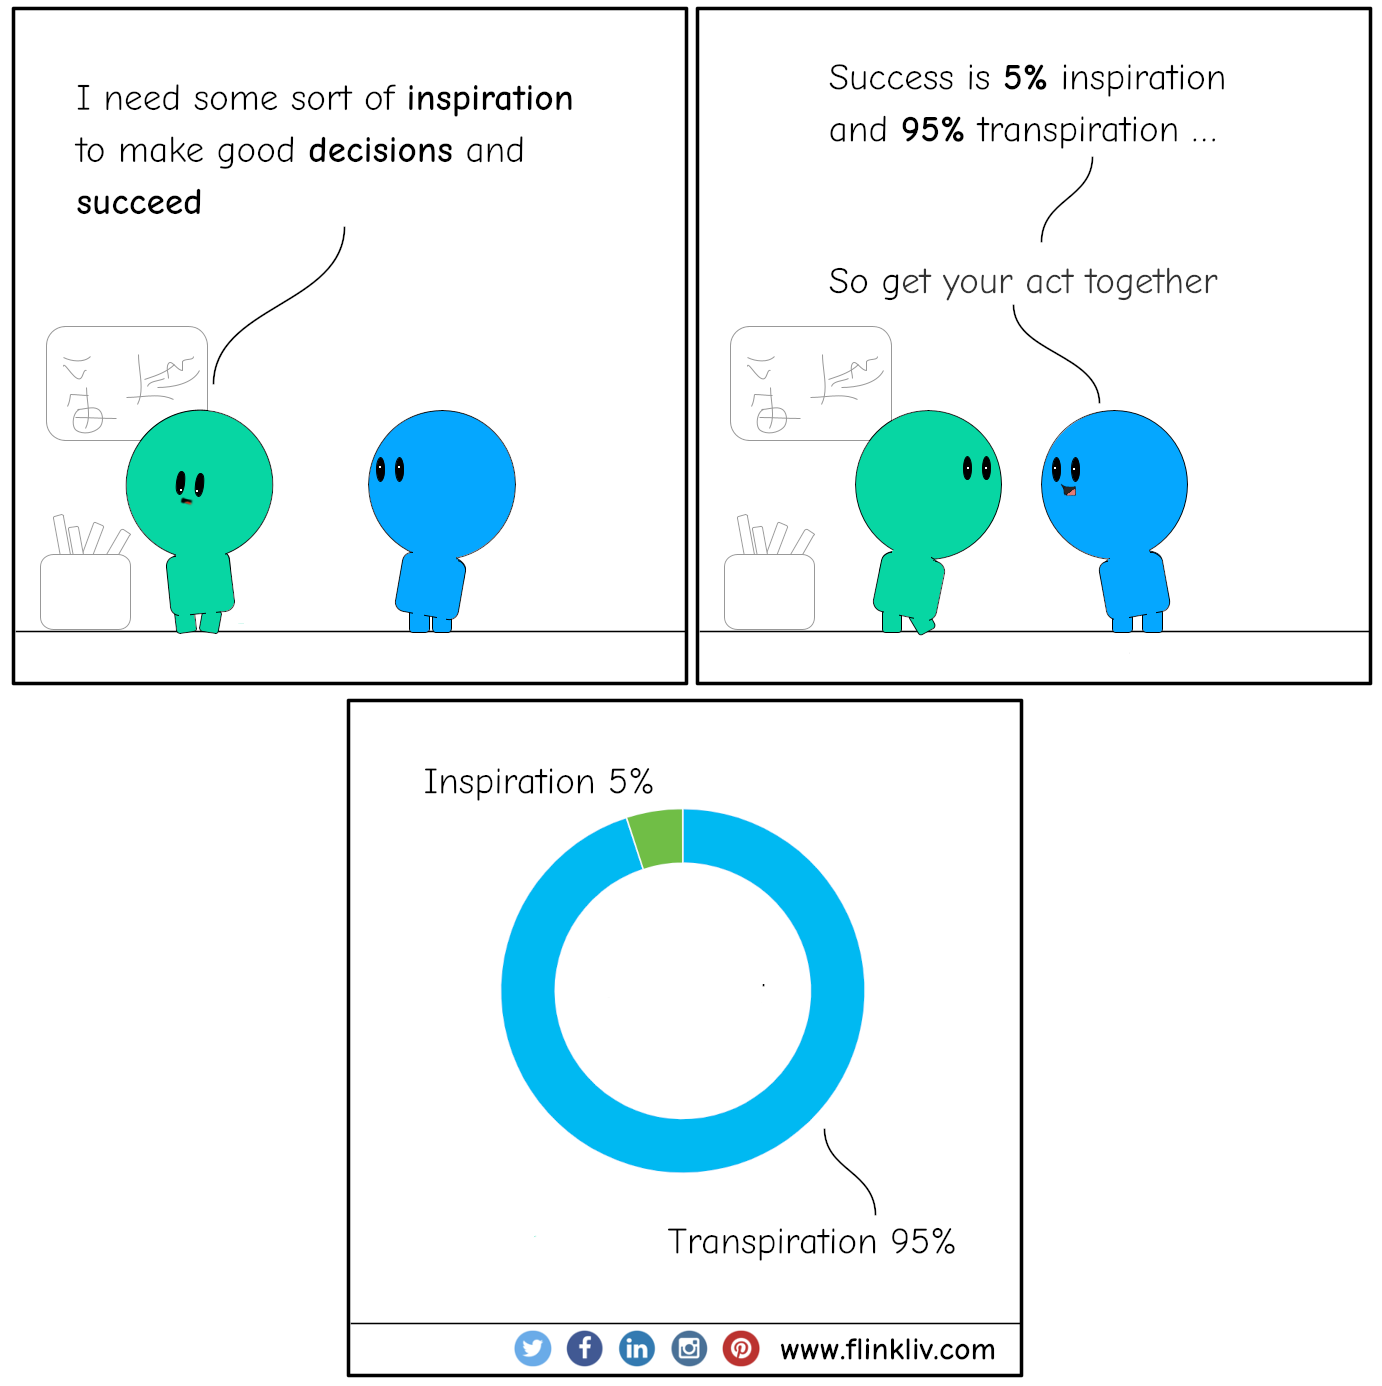 Conversation between A and B about Inspiration and Transpiration. 
            A: I need some sort of inspiration to make good decisions and succeed. 
            B: Success is 5% inspiration and 95% transpiration.
            B: so get your act together.
            